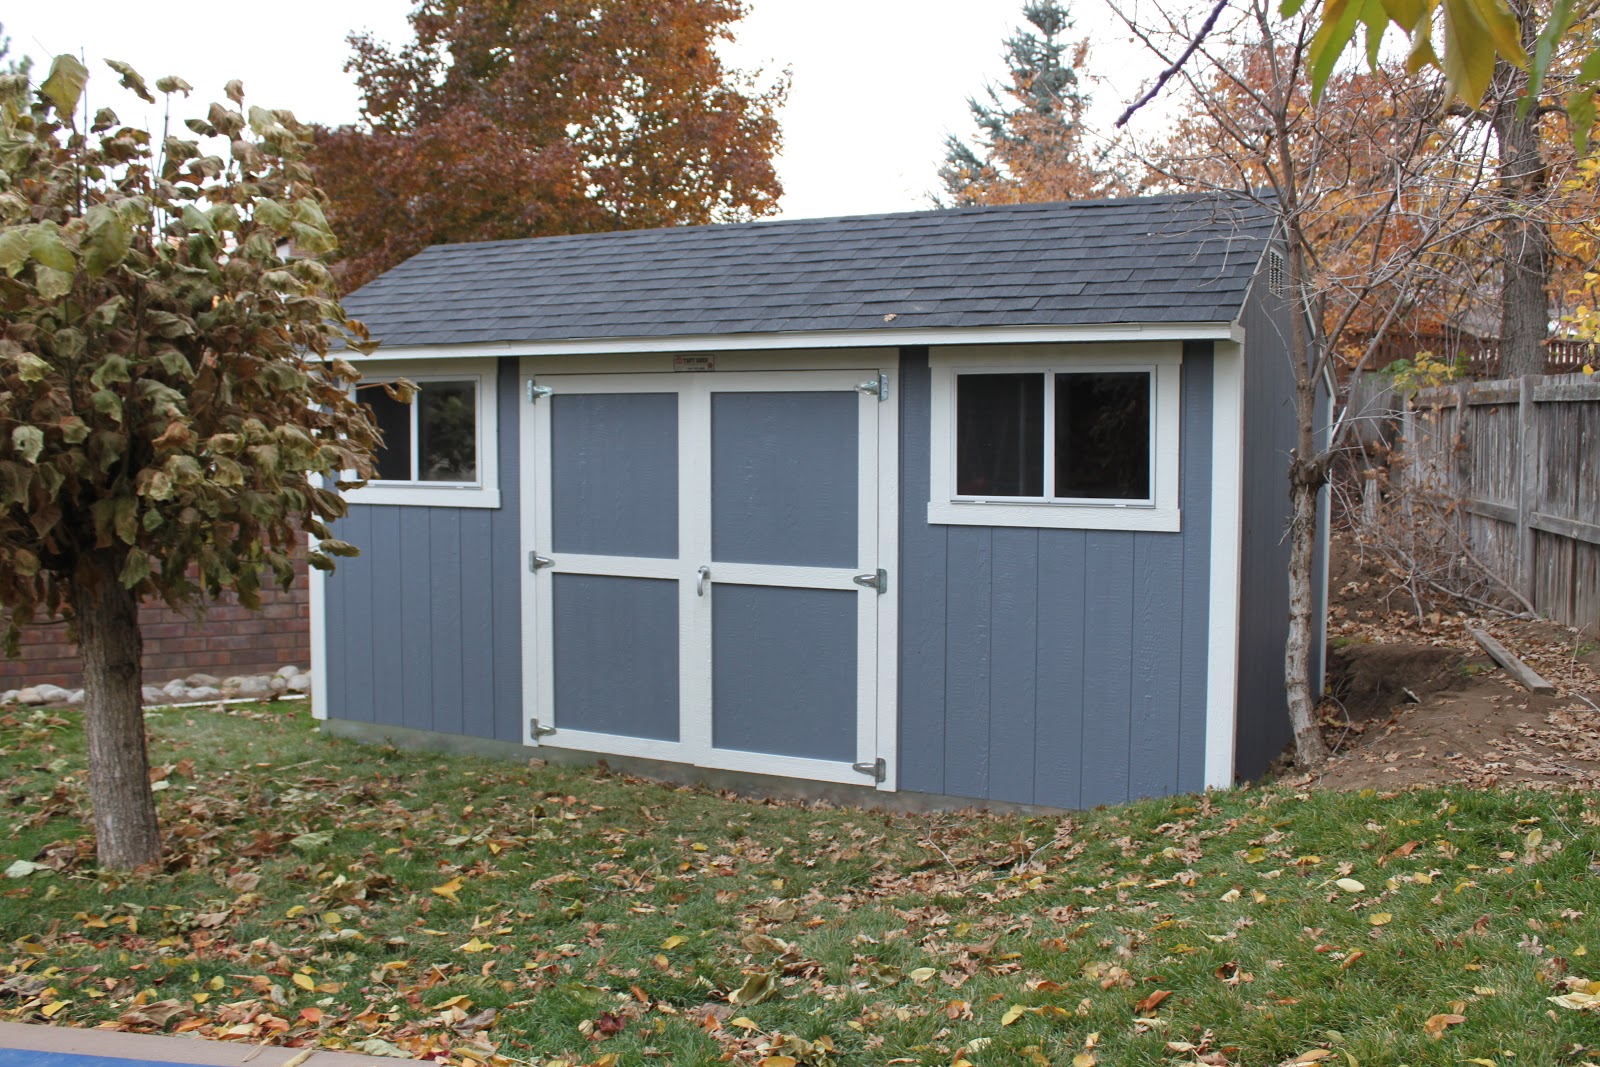 Our new backyard shed.